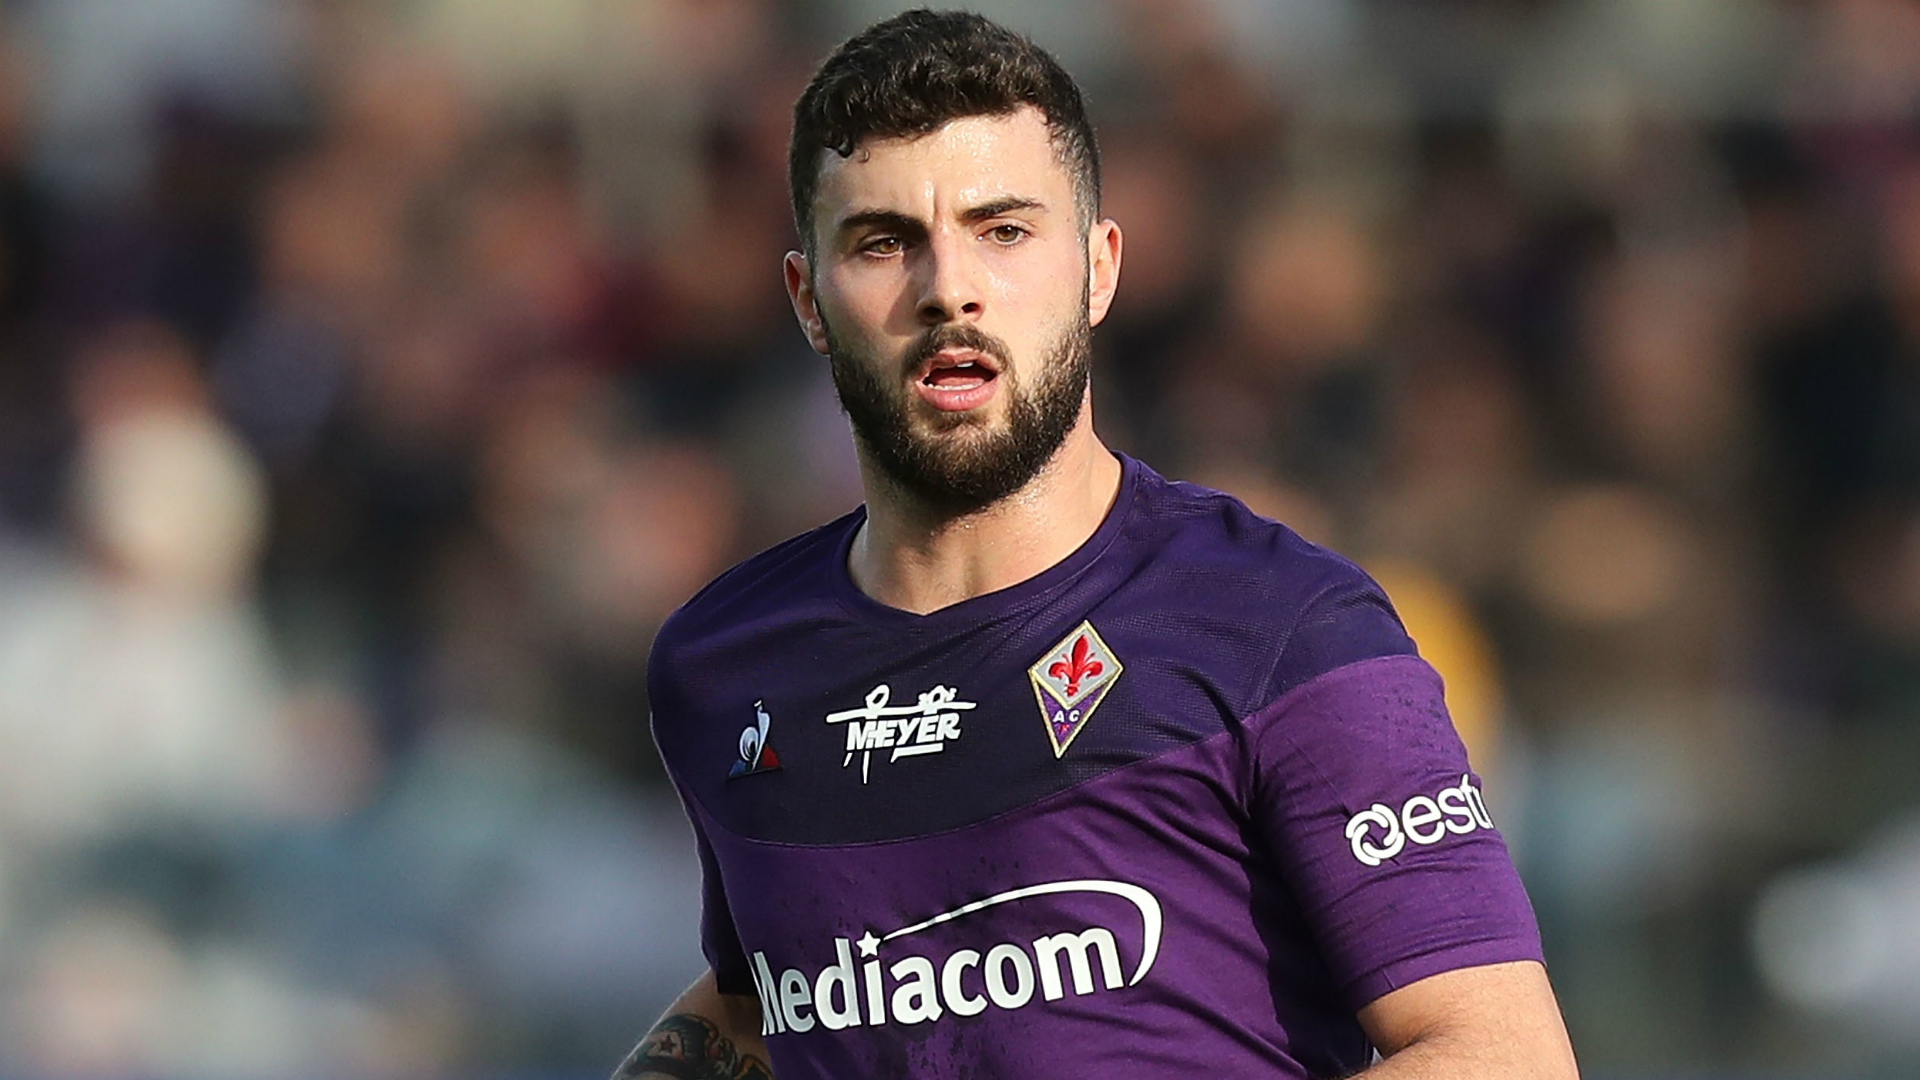 Cutrone Among Three New Confirmed Cases At Fiorentina Sporting News Canada